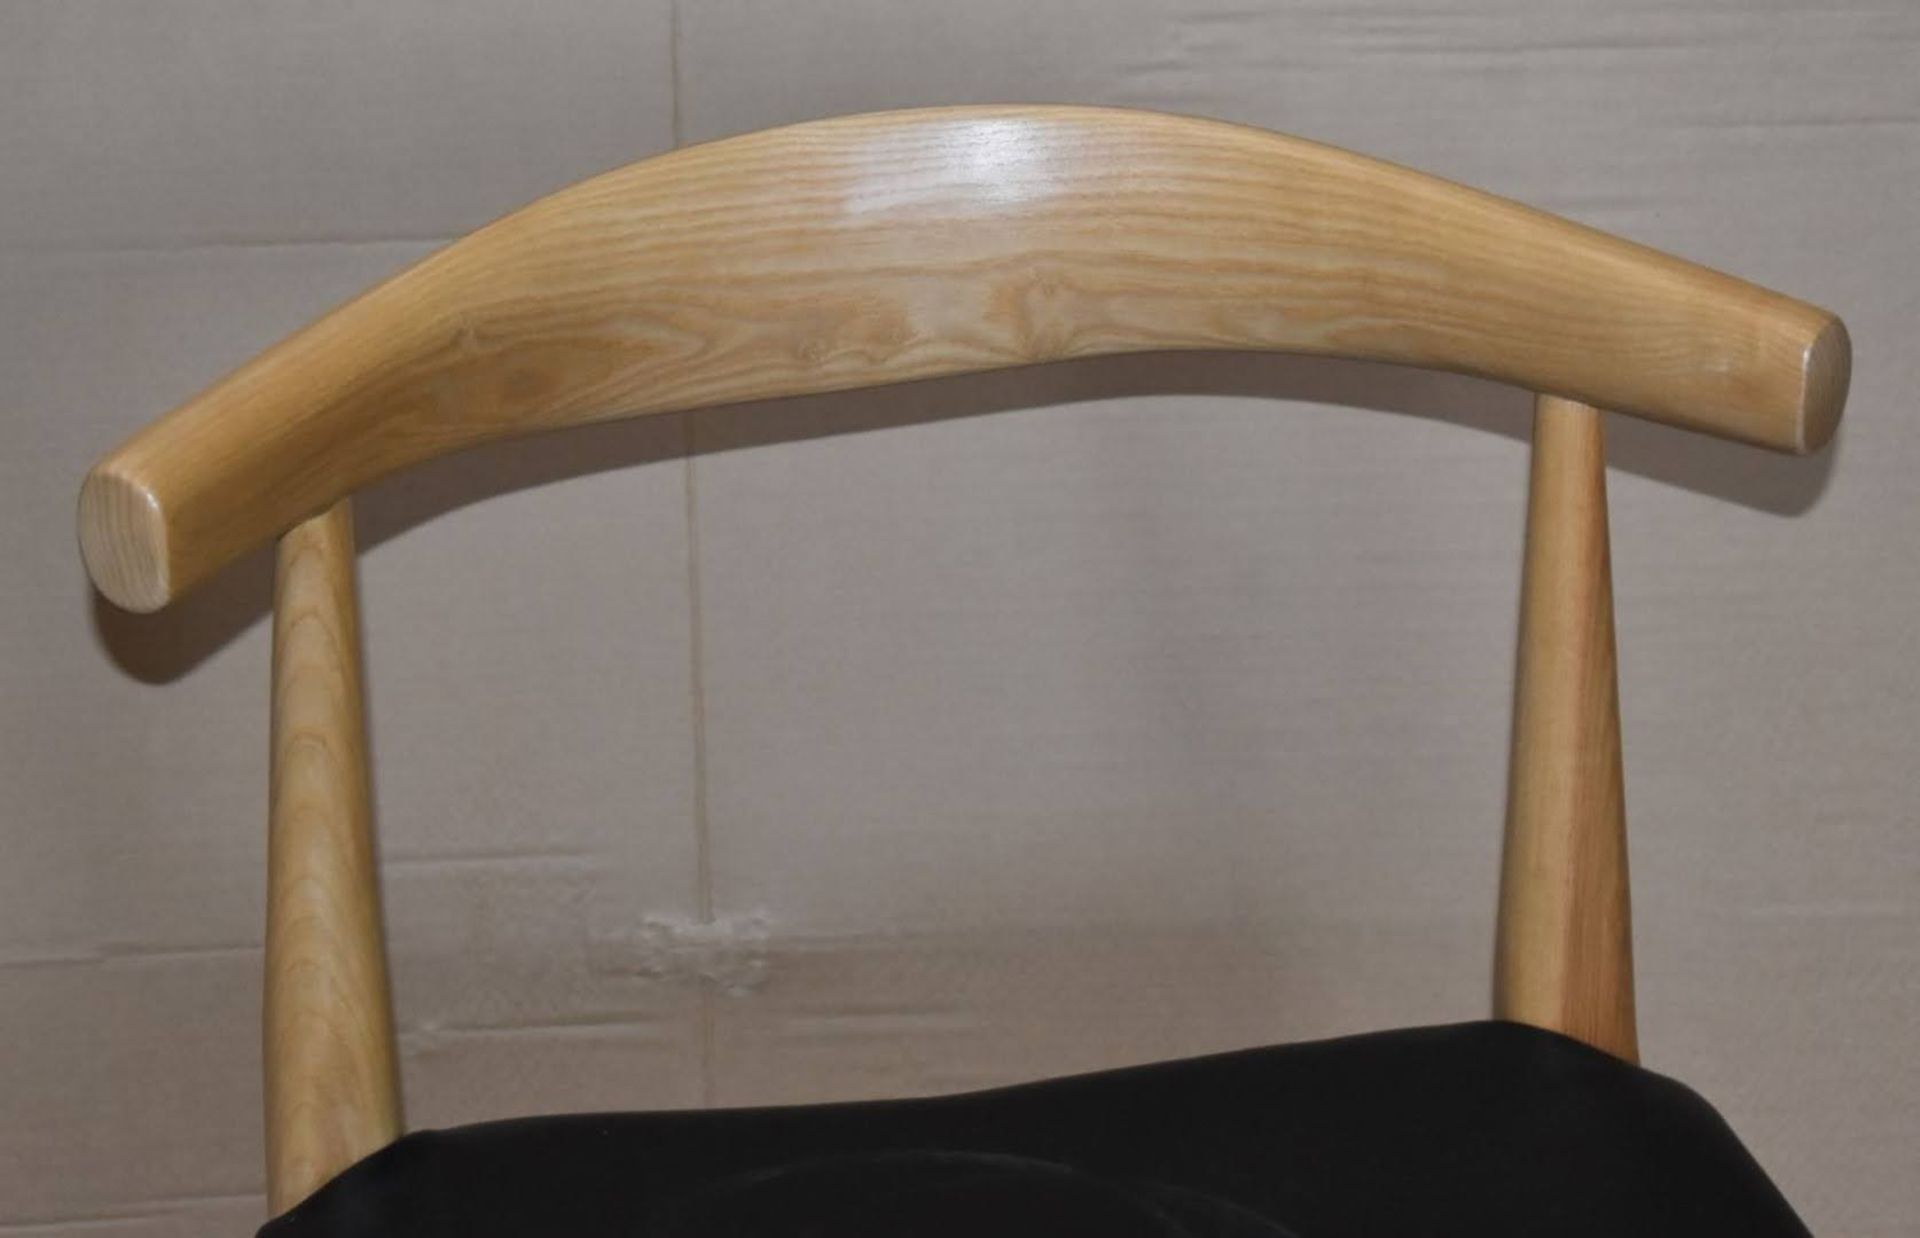 1 x Hans Wegner Inspired Elbow Chair - Solid Wood Chair With Light Stain Finish and Black Seat Pad - - Image 6 of 9